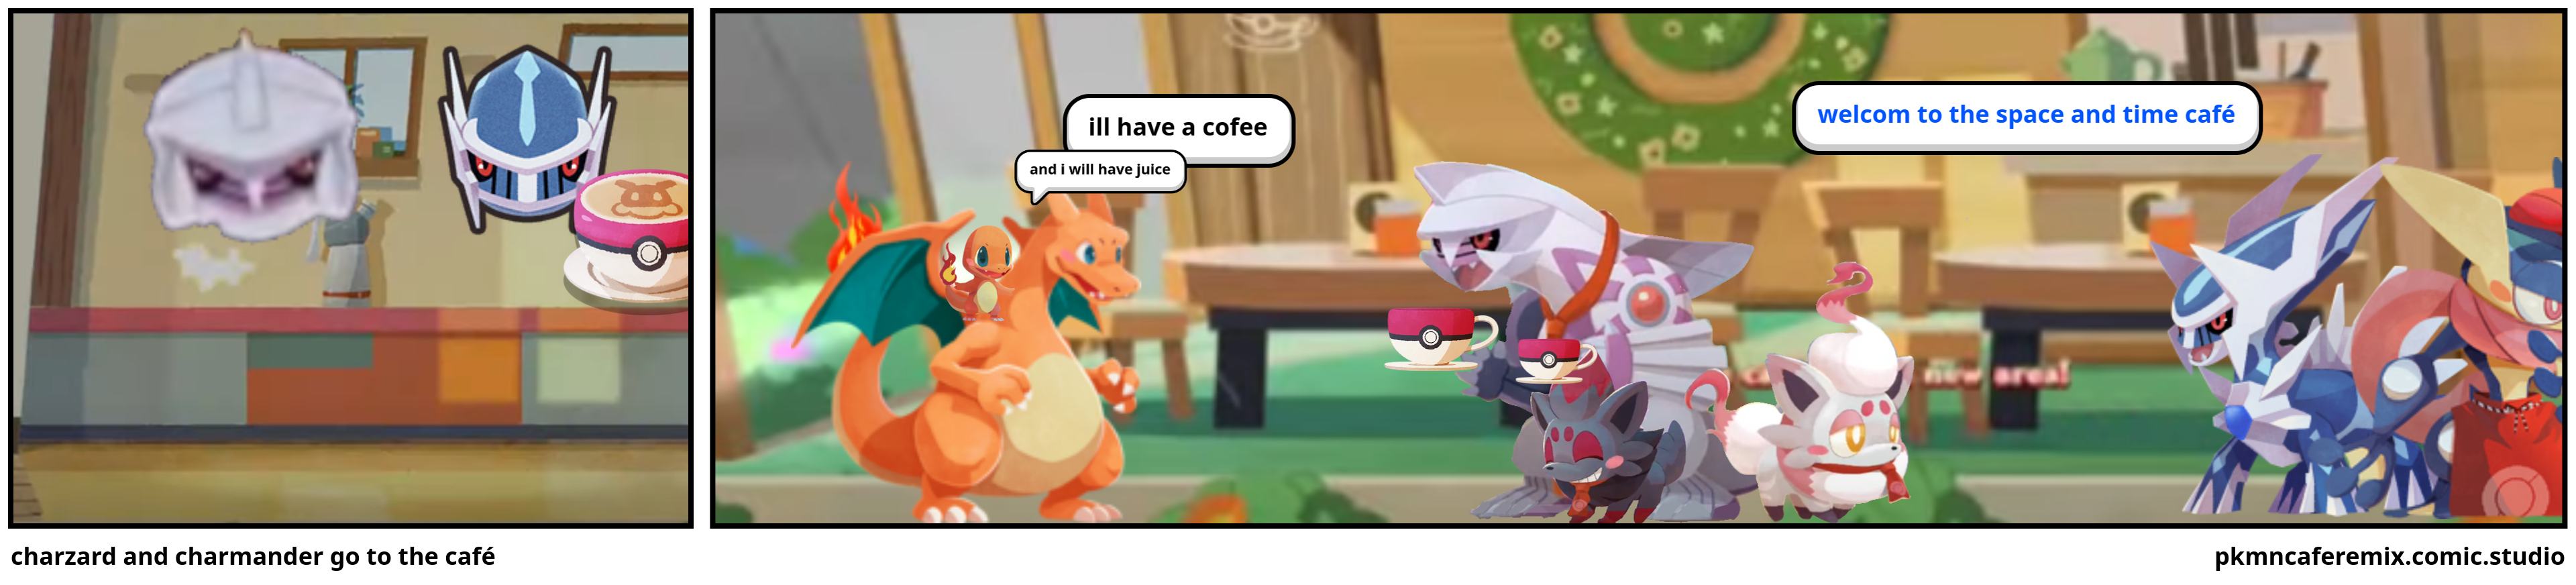 charzard and charmander go to the café